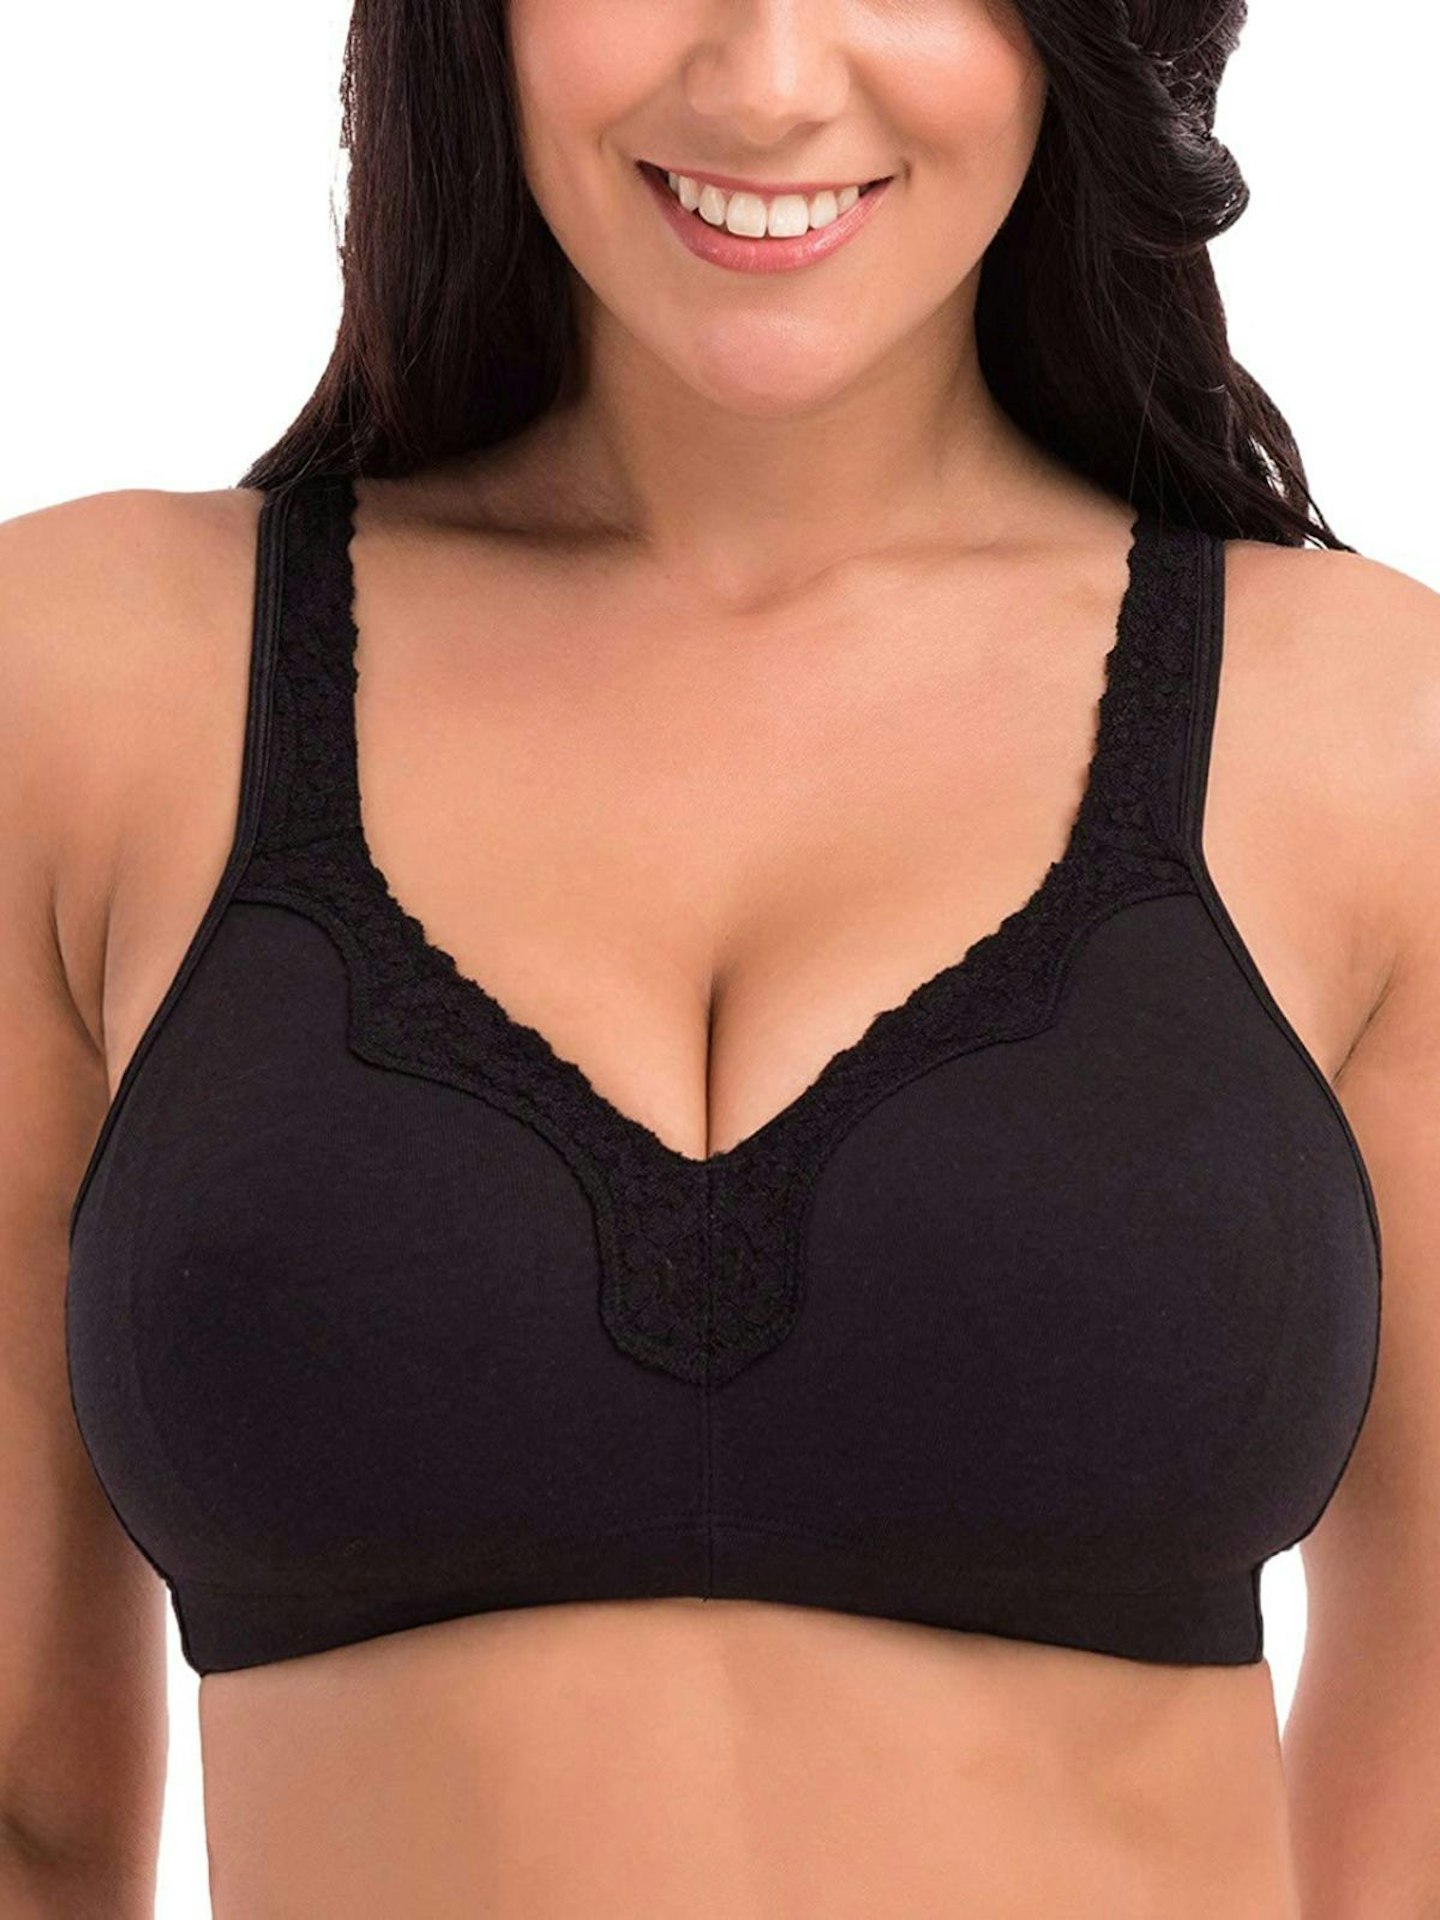 Genius bra hacks to save you in any situation! Quick & Easy hacks